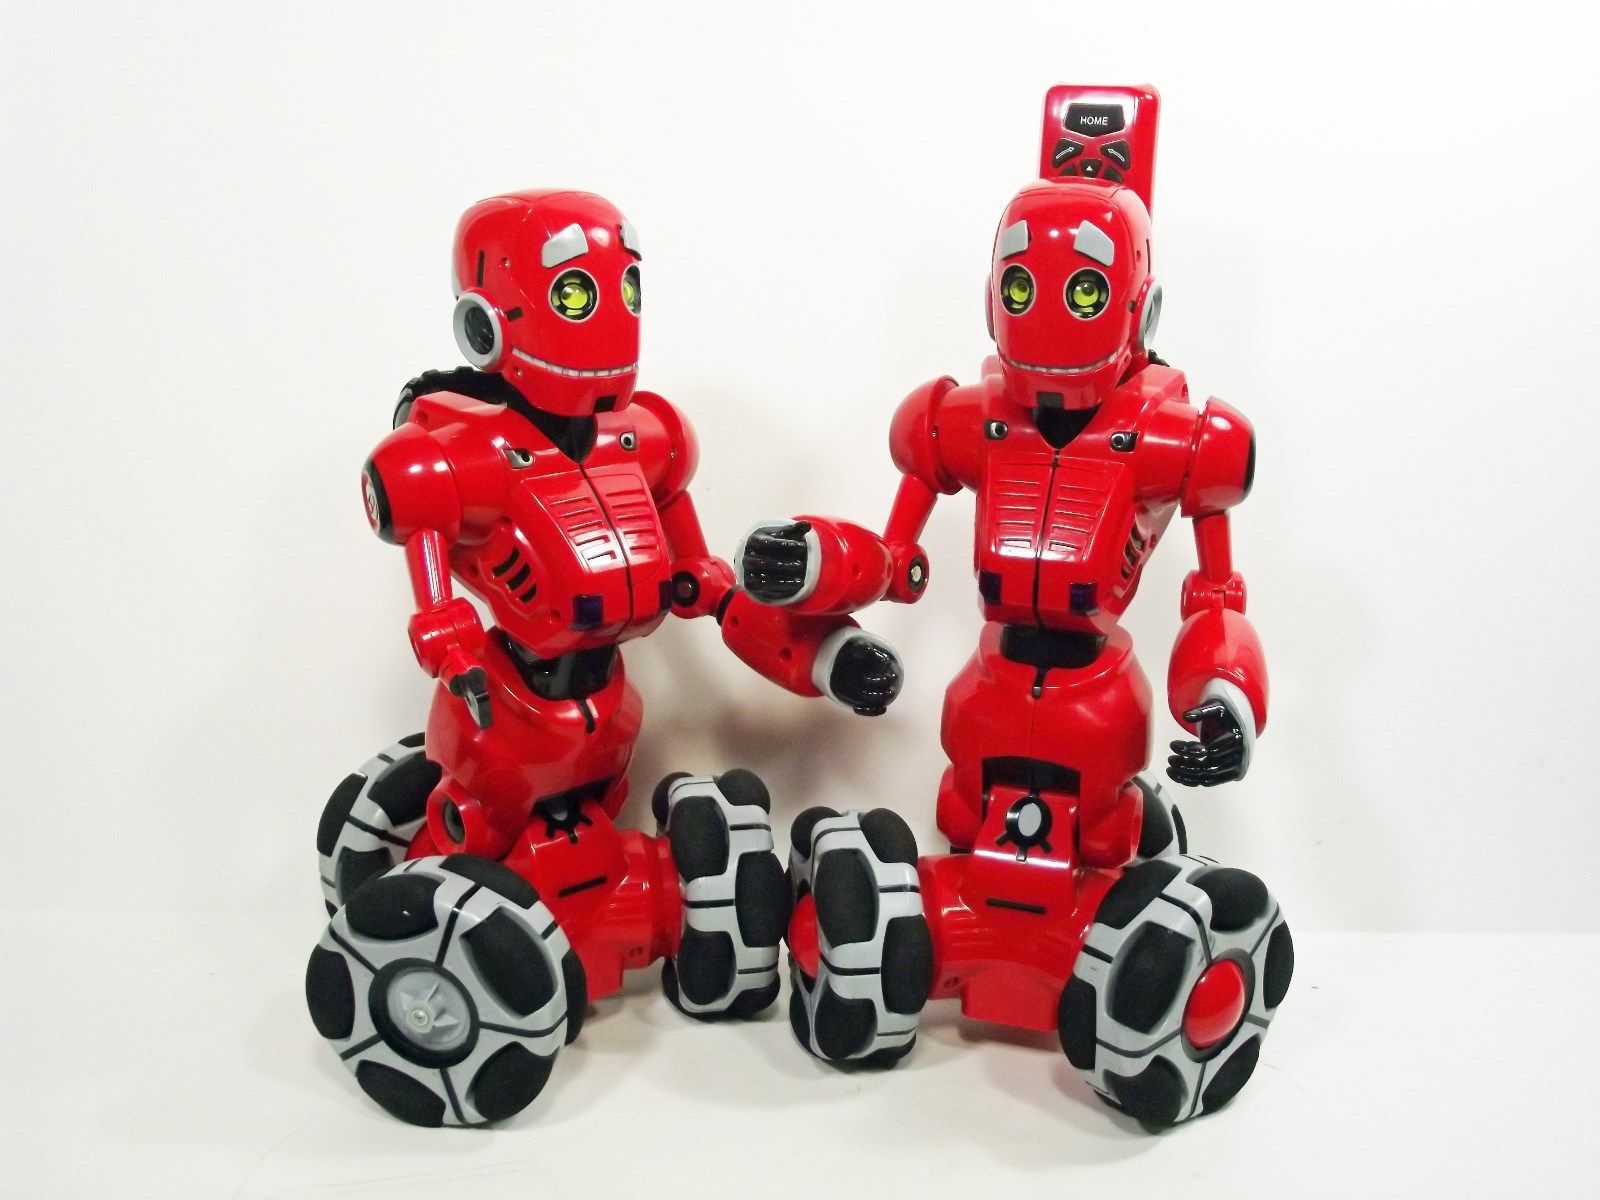 wowwee tribot remote